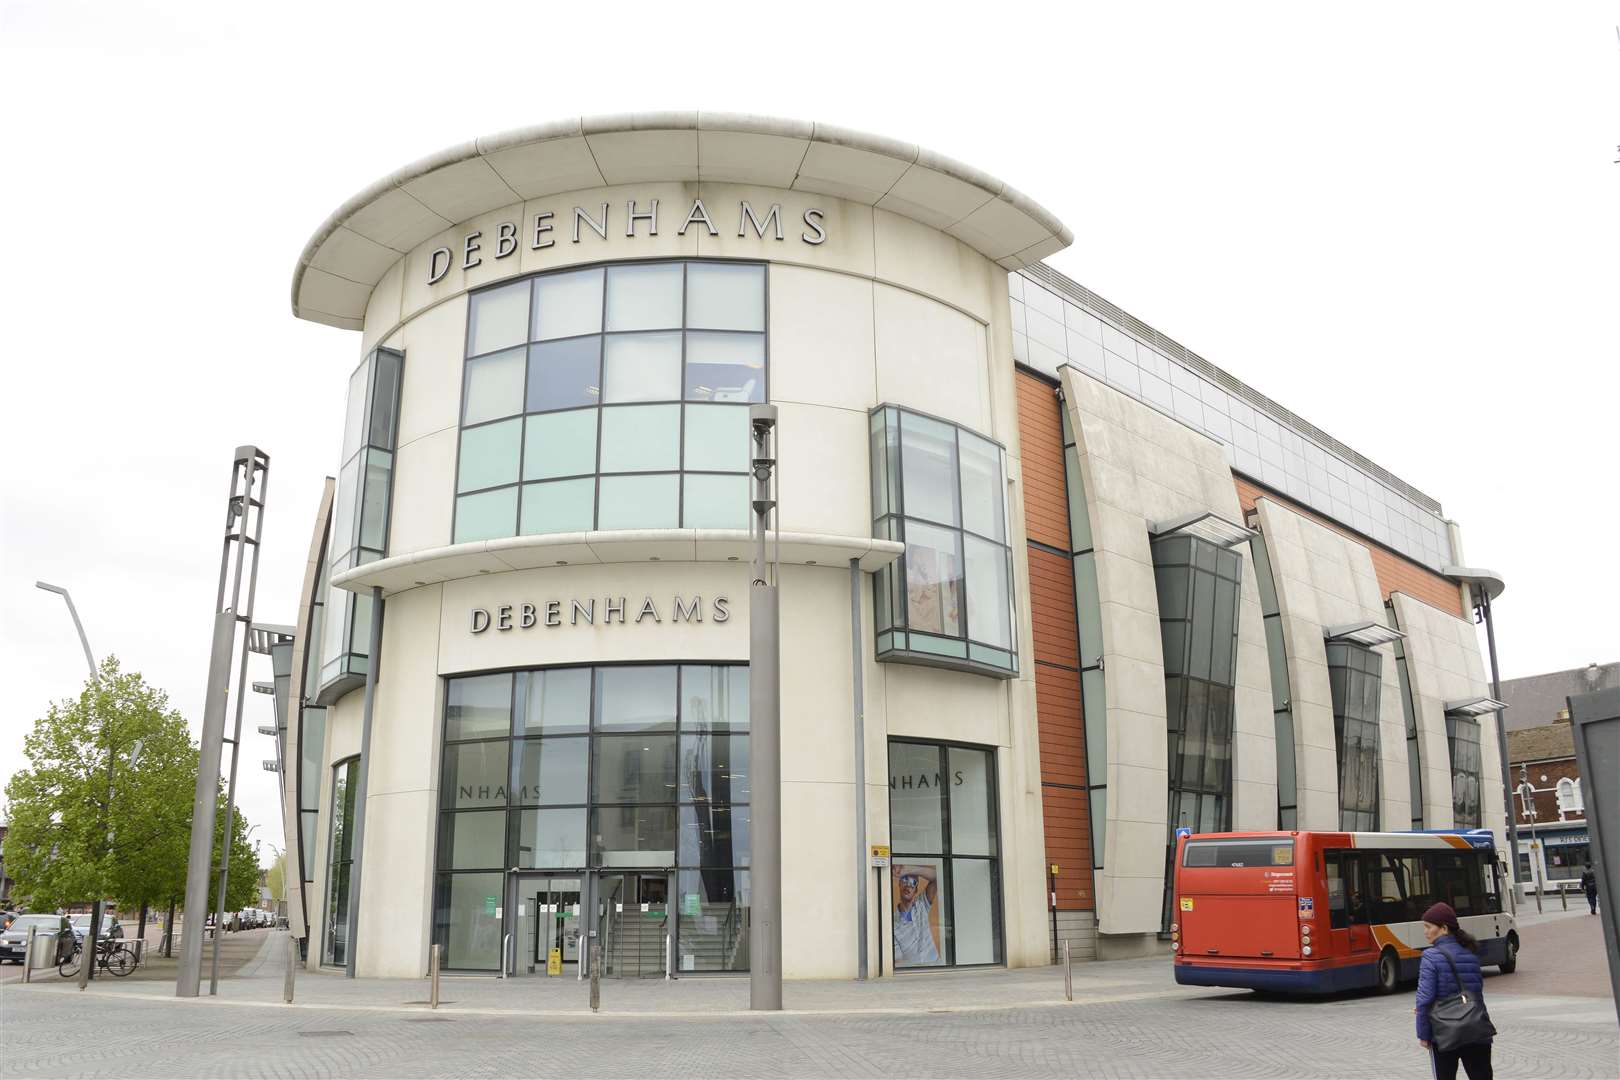 Ashford's Debenhams opened in 2008 as the flagship store in the County Square extension